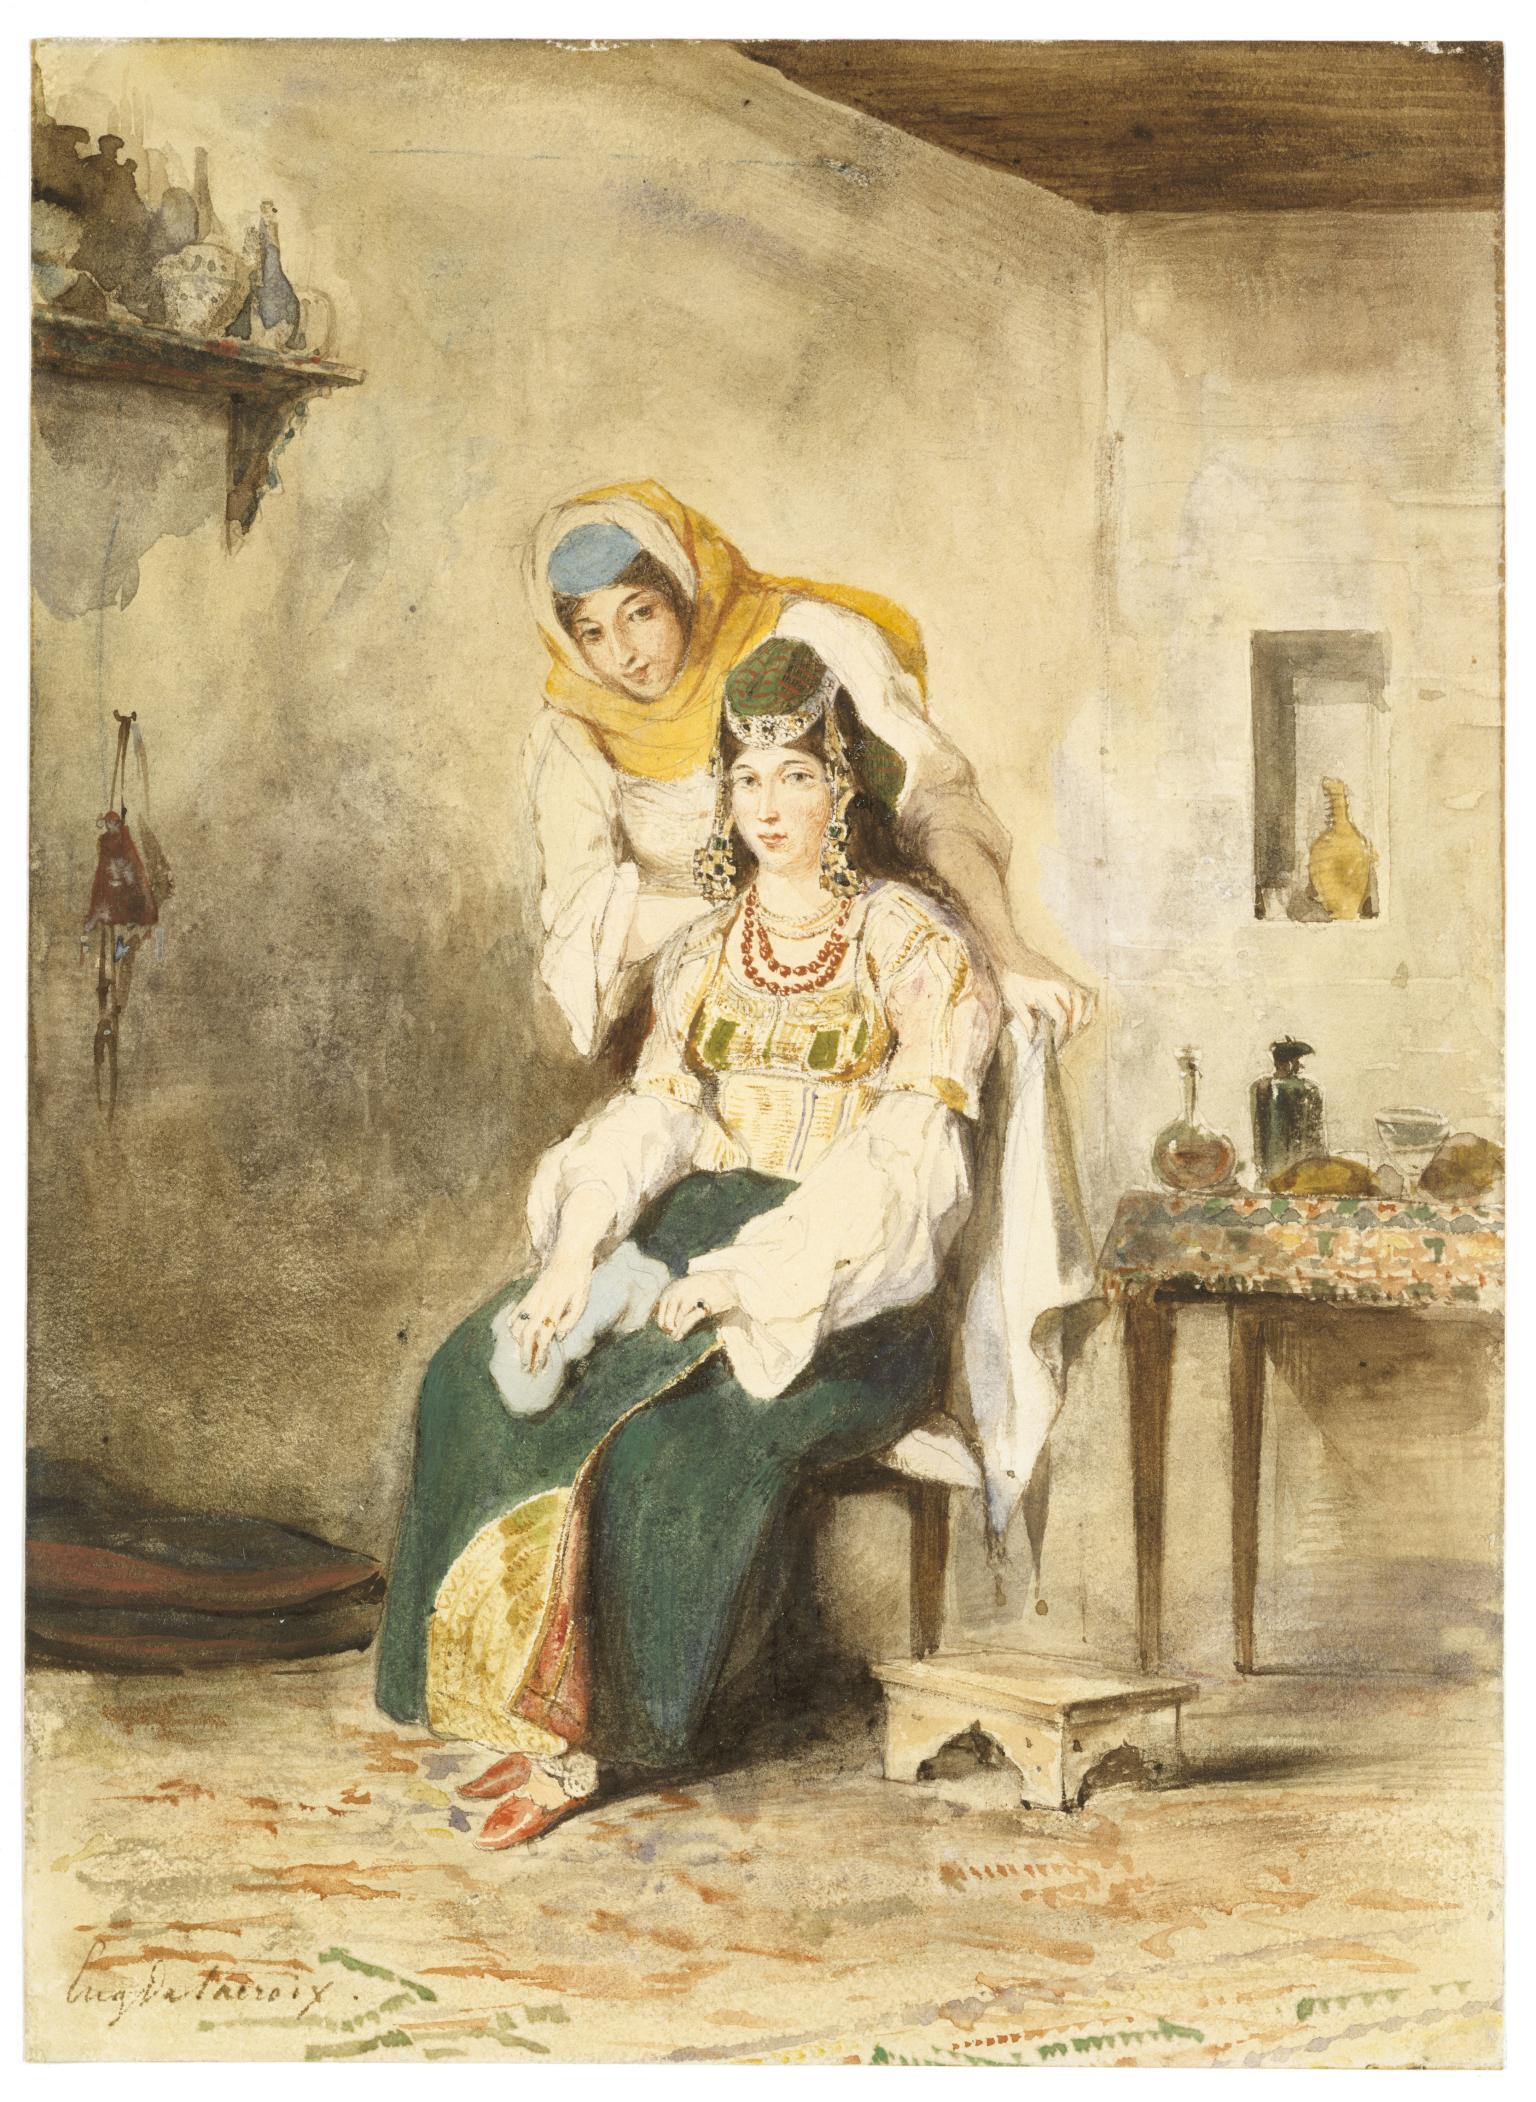 Watercolor featuring seated young woman in beaded headdress and flowing dress, and another woman in shawl leaning over her. 